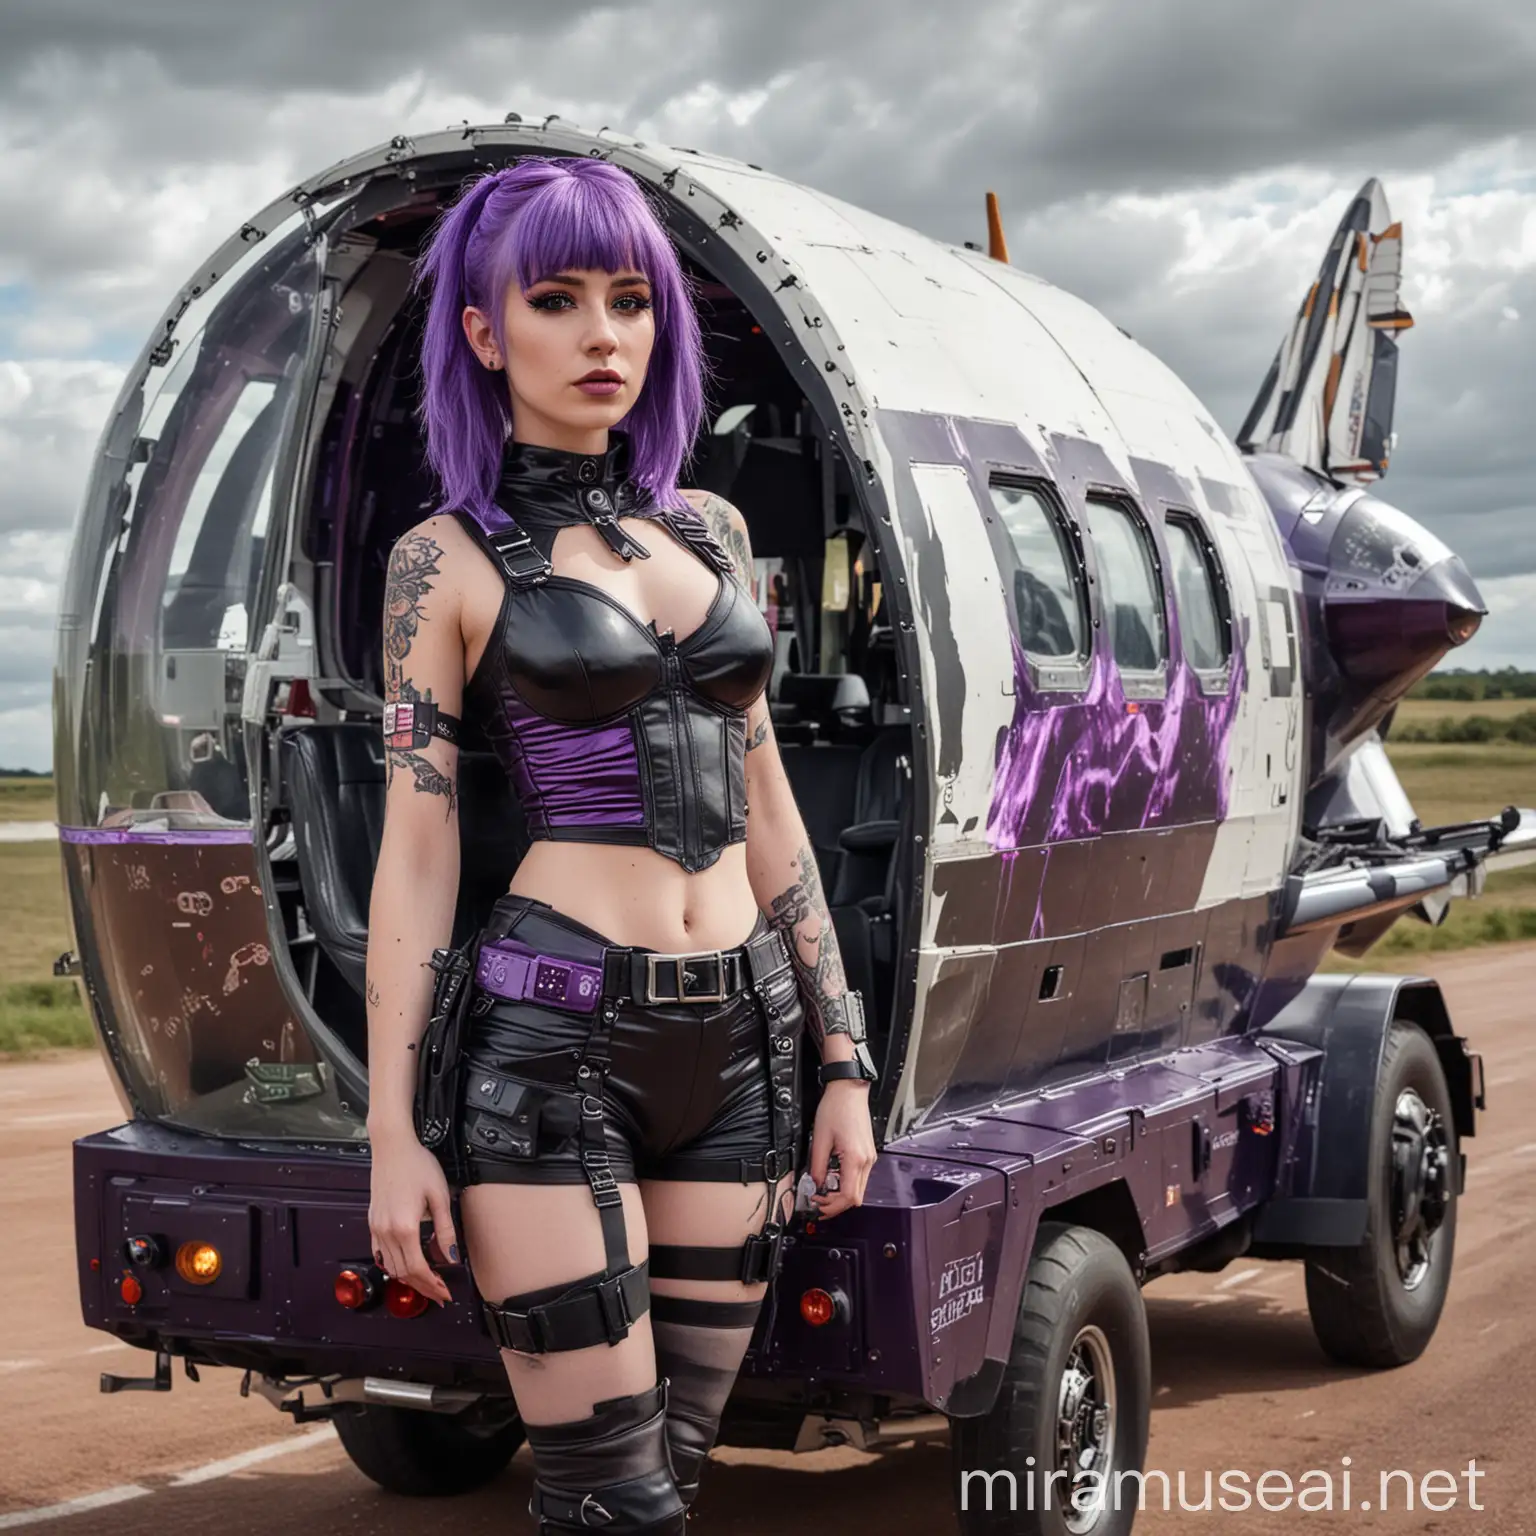 Sexy goth girl with purple hair driving a horsebox with a space shuttle escape pod strapped to the side of it 